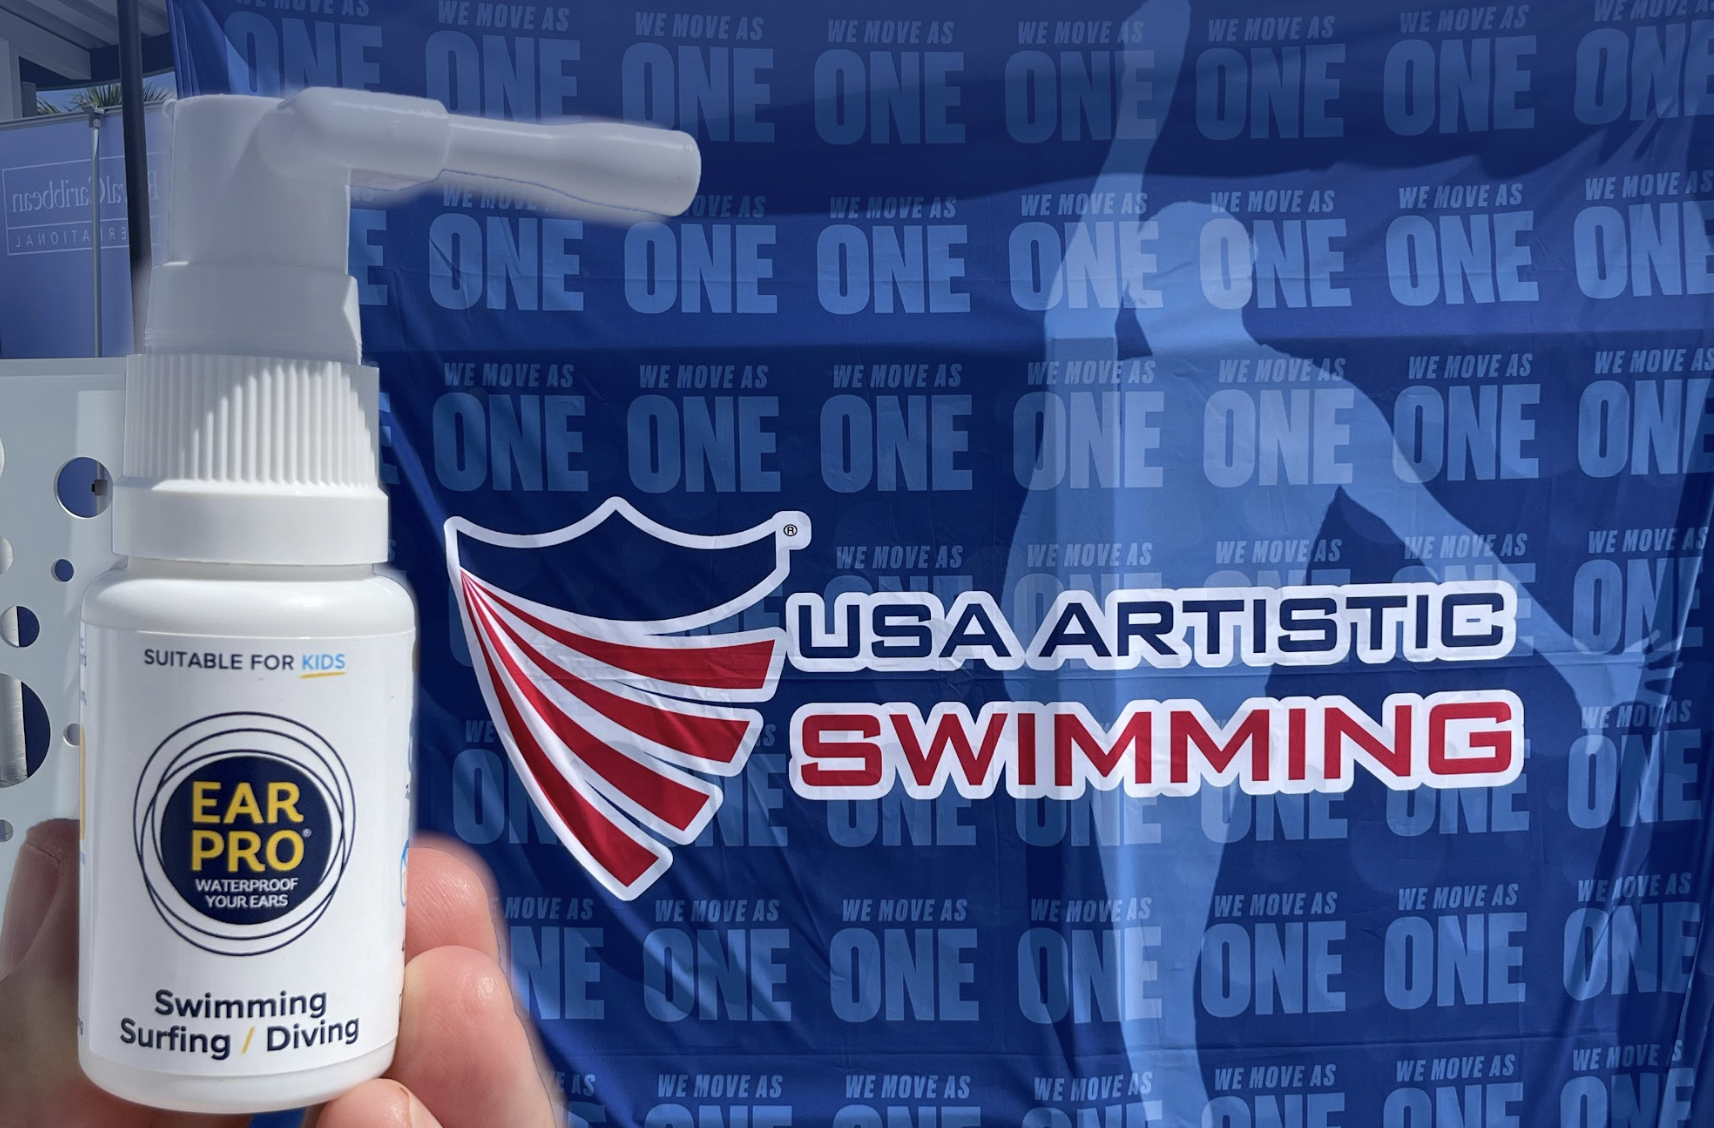 USA Artistic Swimming (USAAS) teams up  with Ear Pro